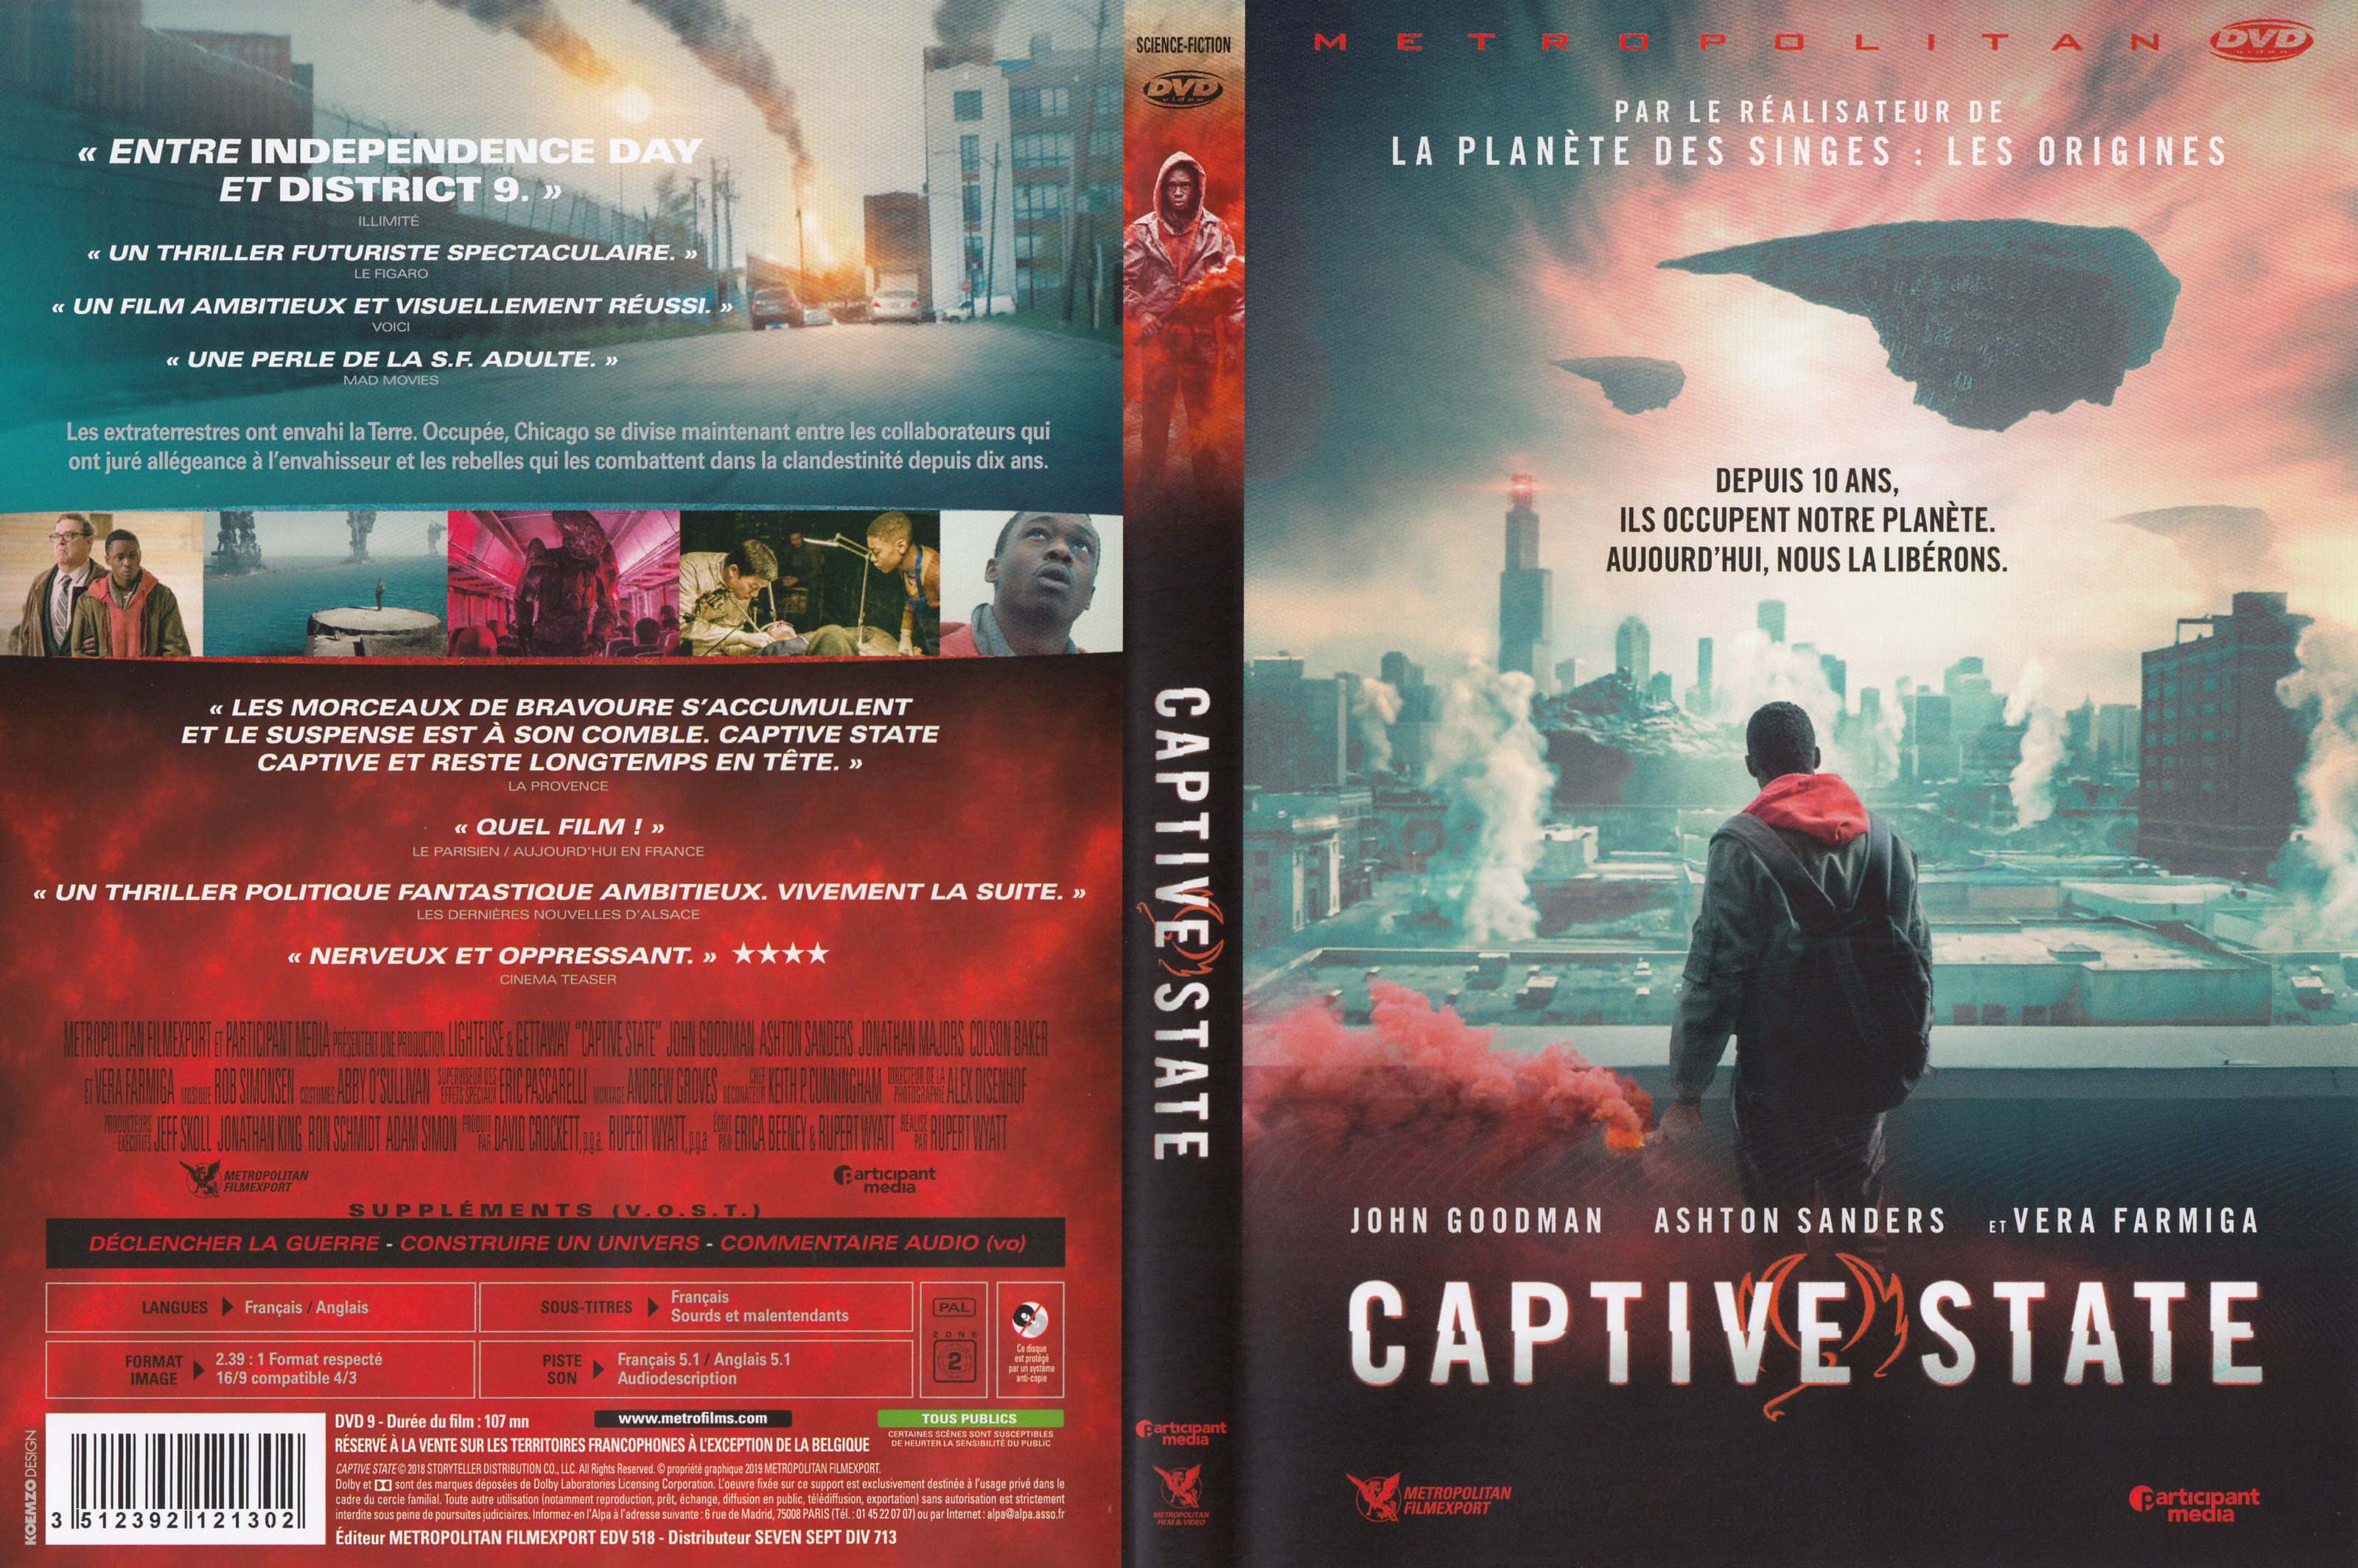 Jaquette DVD Captive State